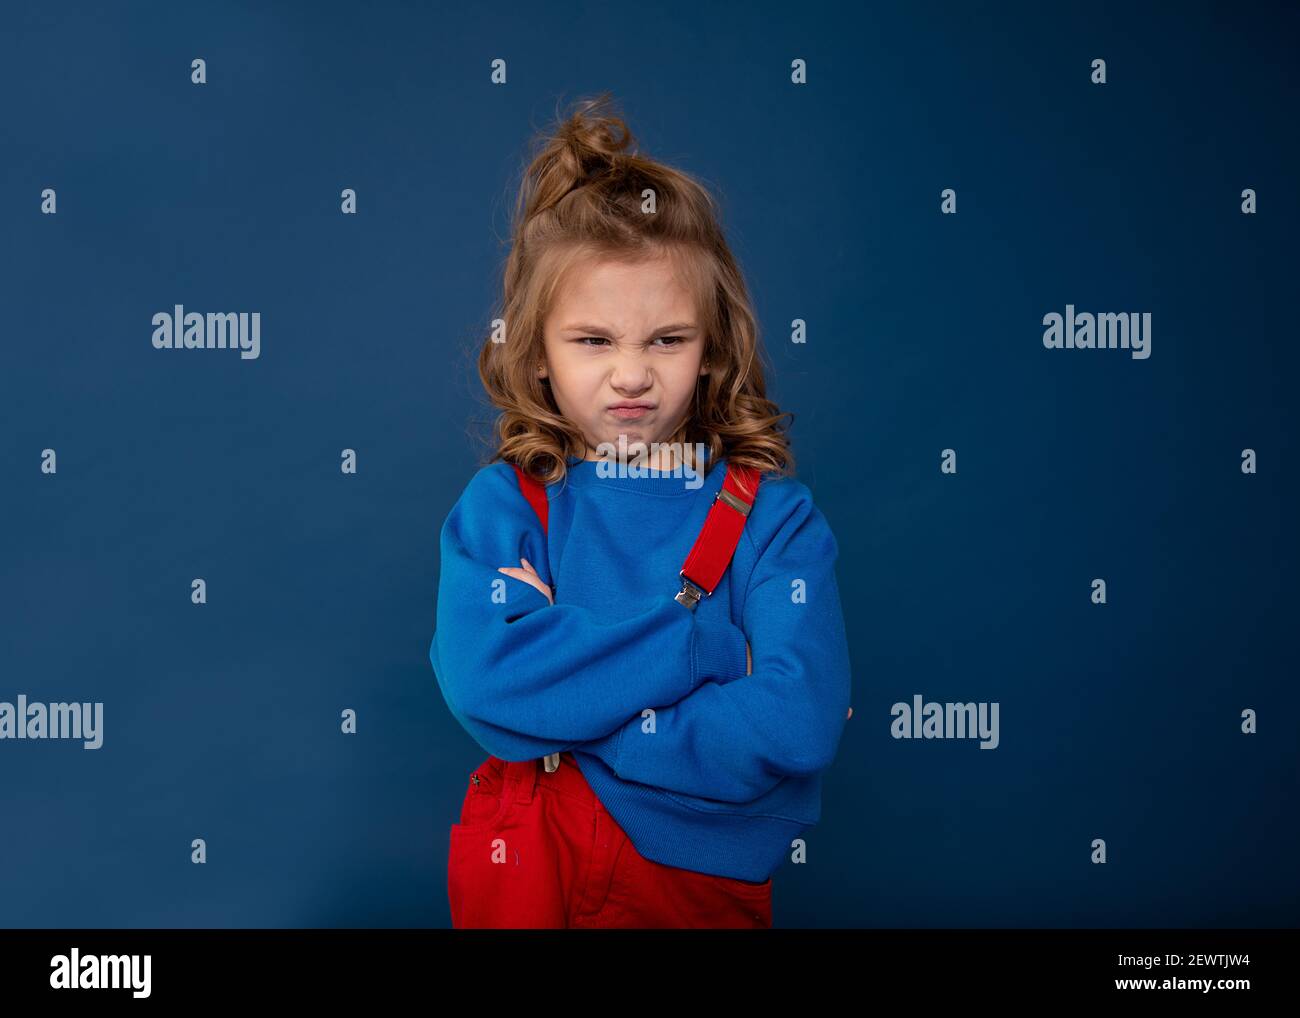 Spoiled child, naughty baby, kids whims. Beautiful little girl showing character. Child crisis psychology concept. Close-up photo Stock Photo